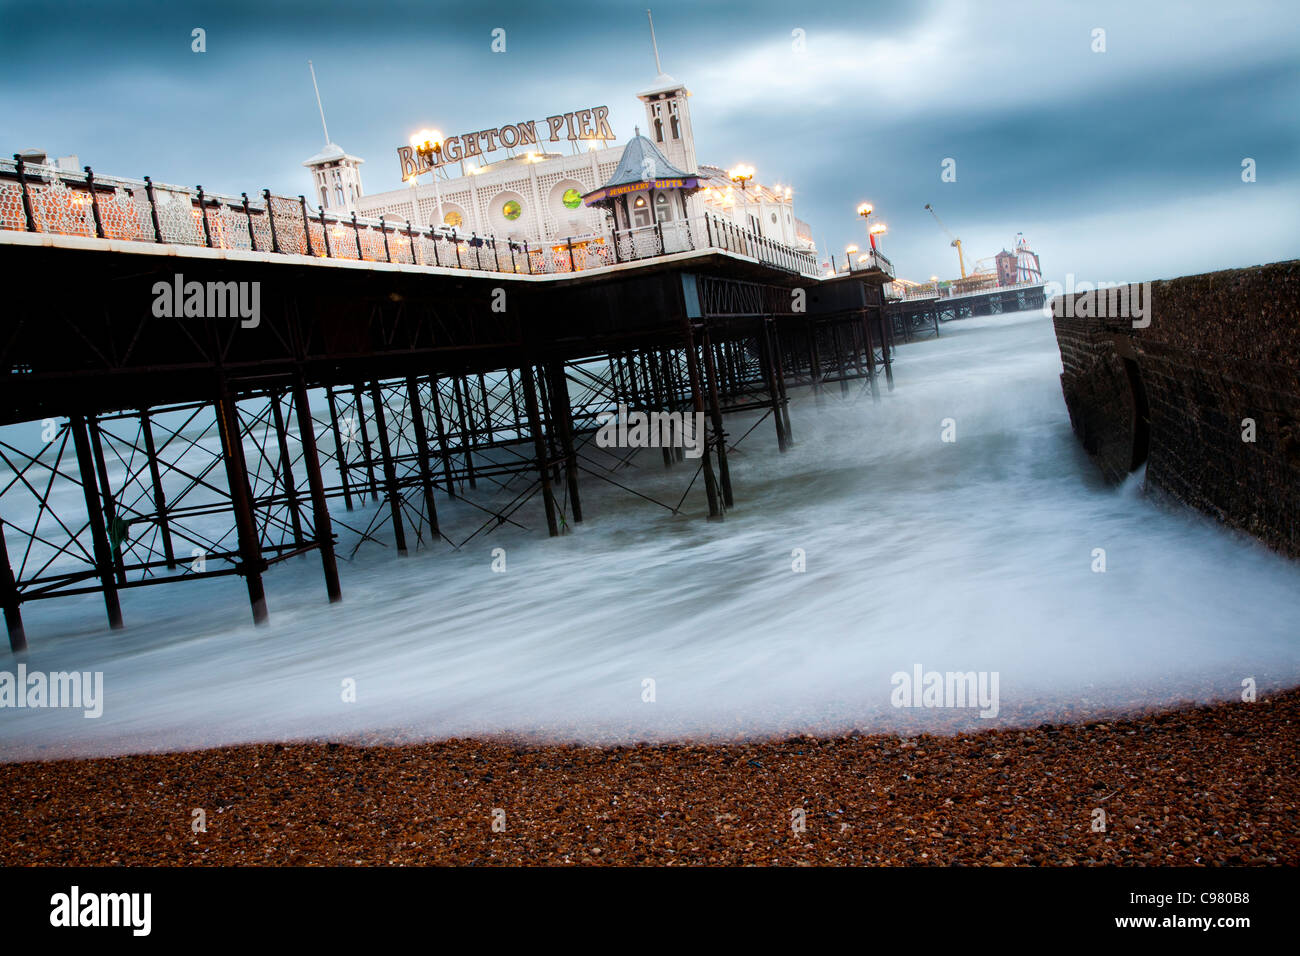 Seegang am Palace Pier in Brighton, Sussex Stockfoto